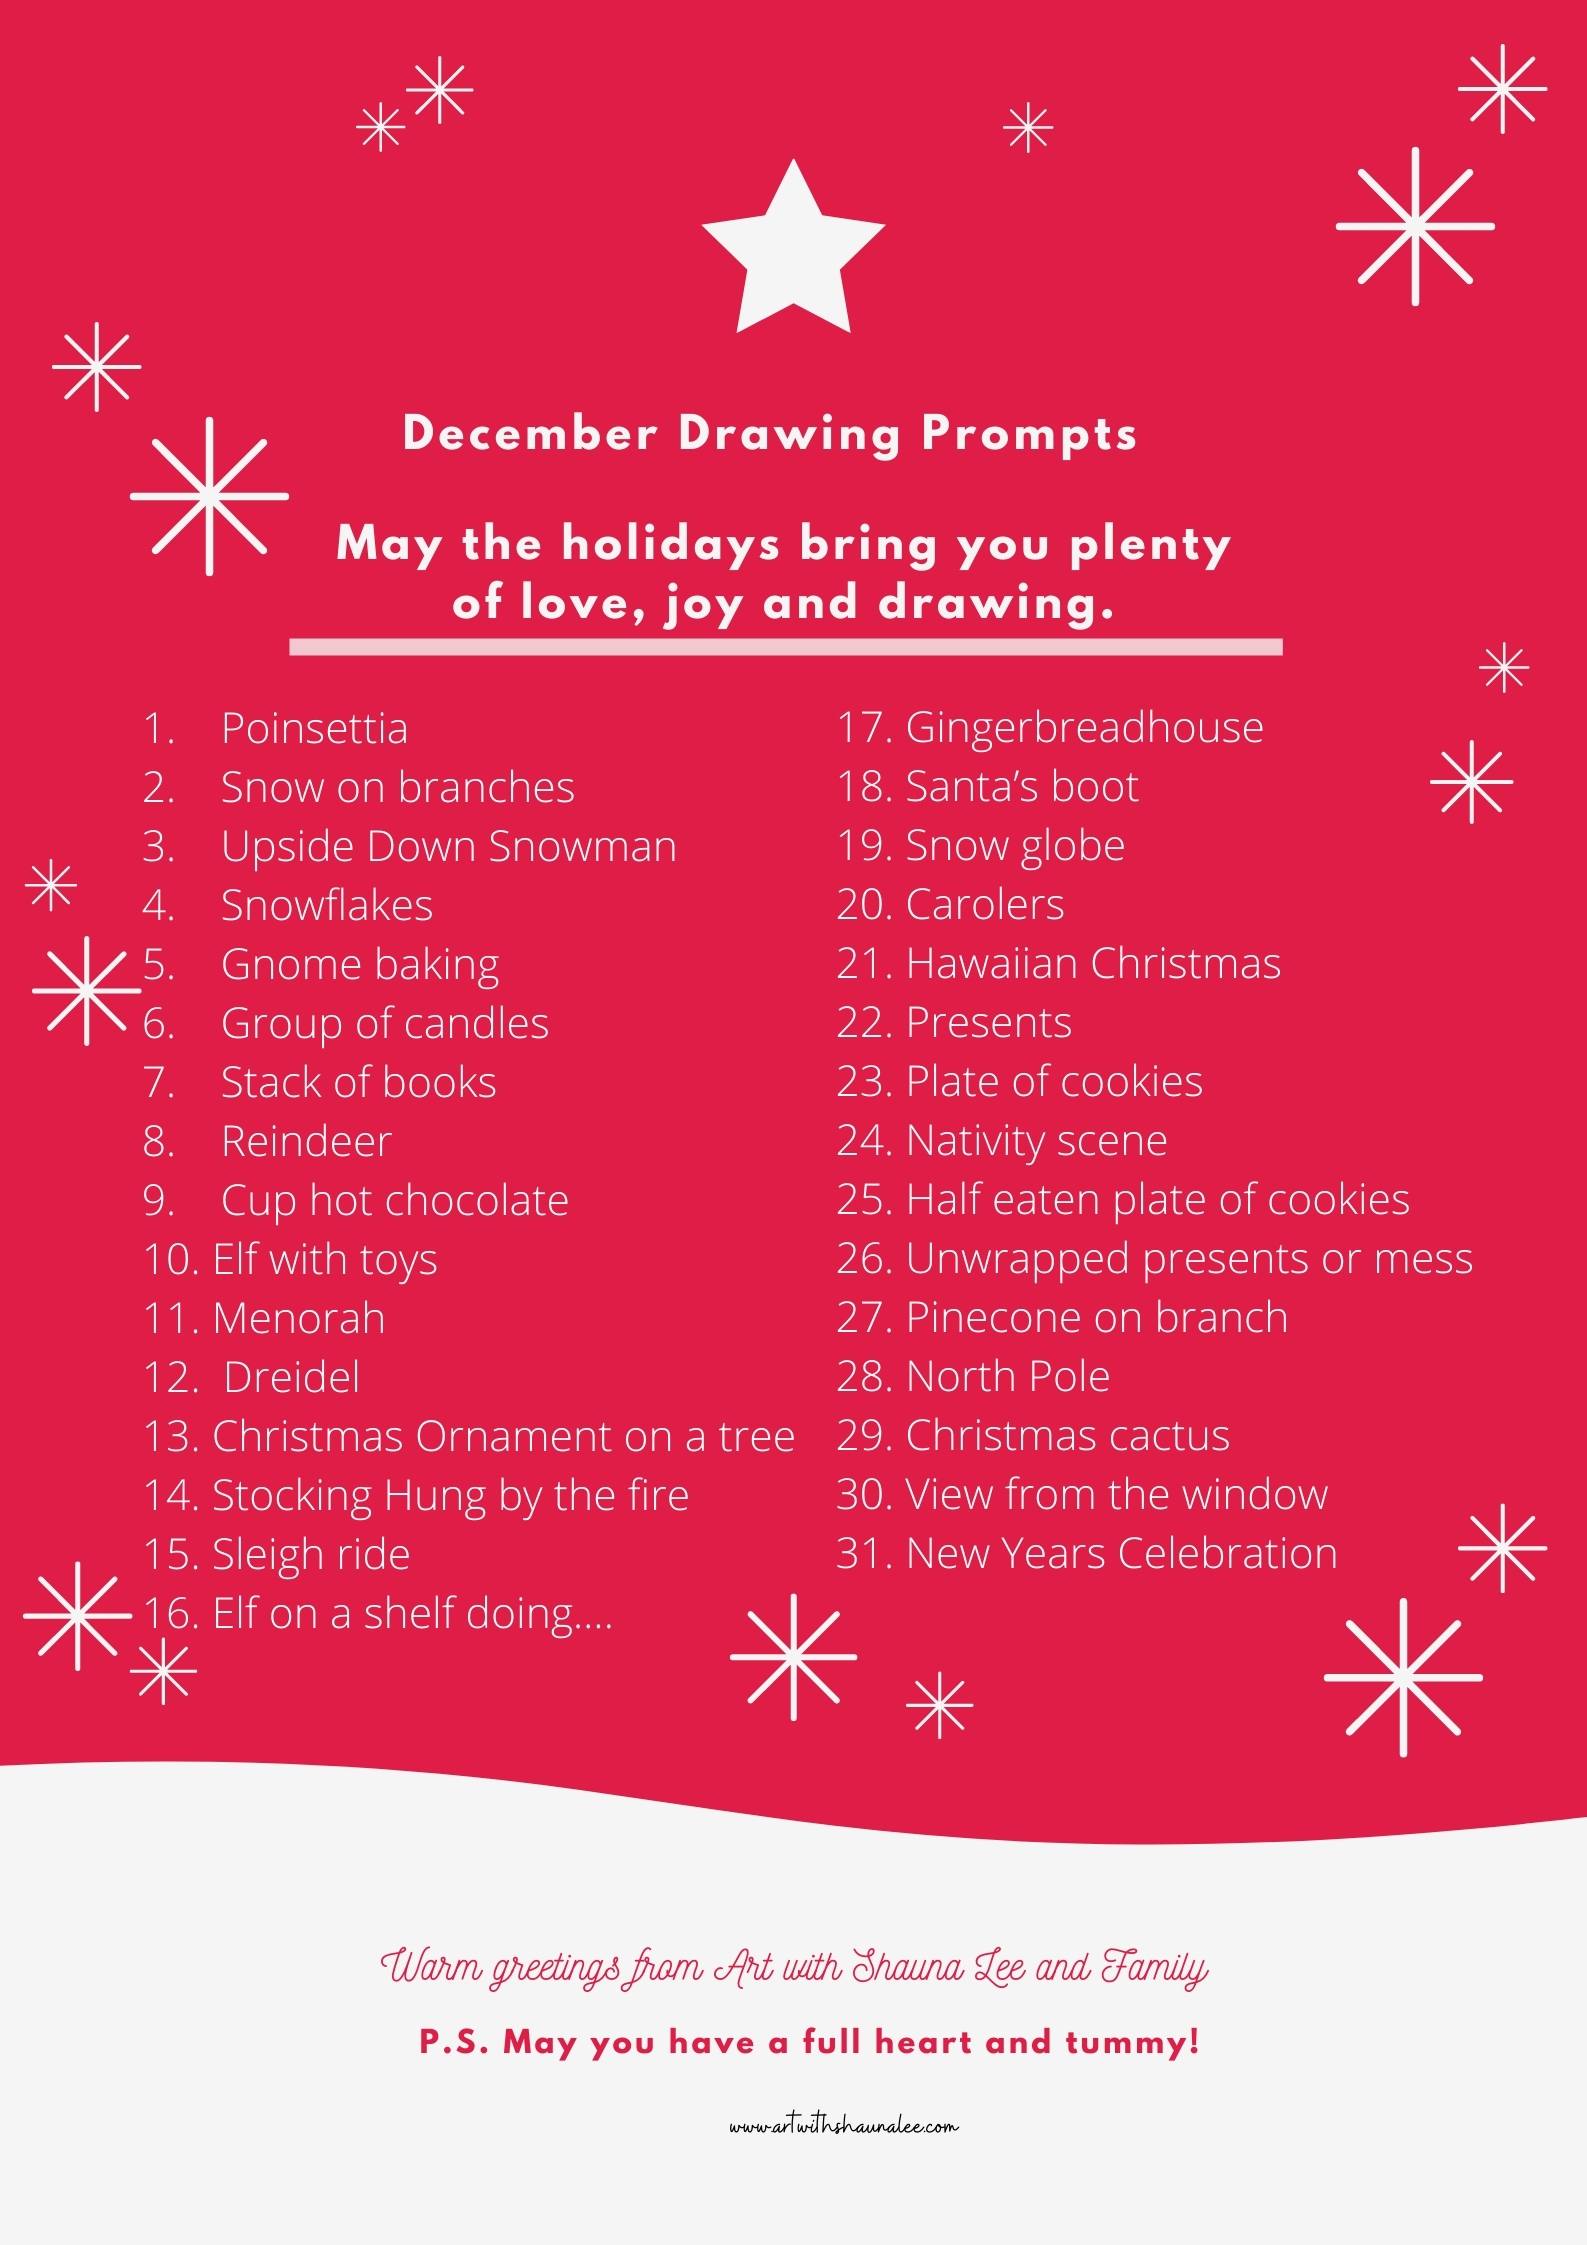 December Drawing Prompts Art with Shauna Lee